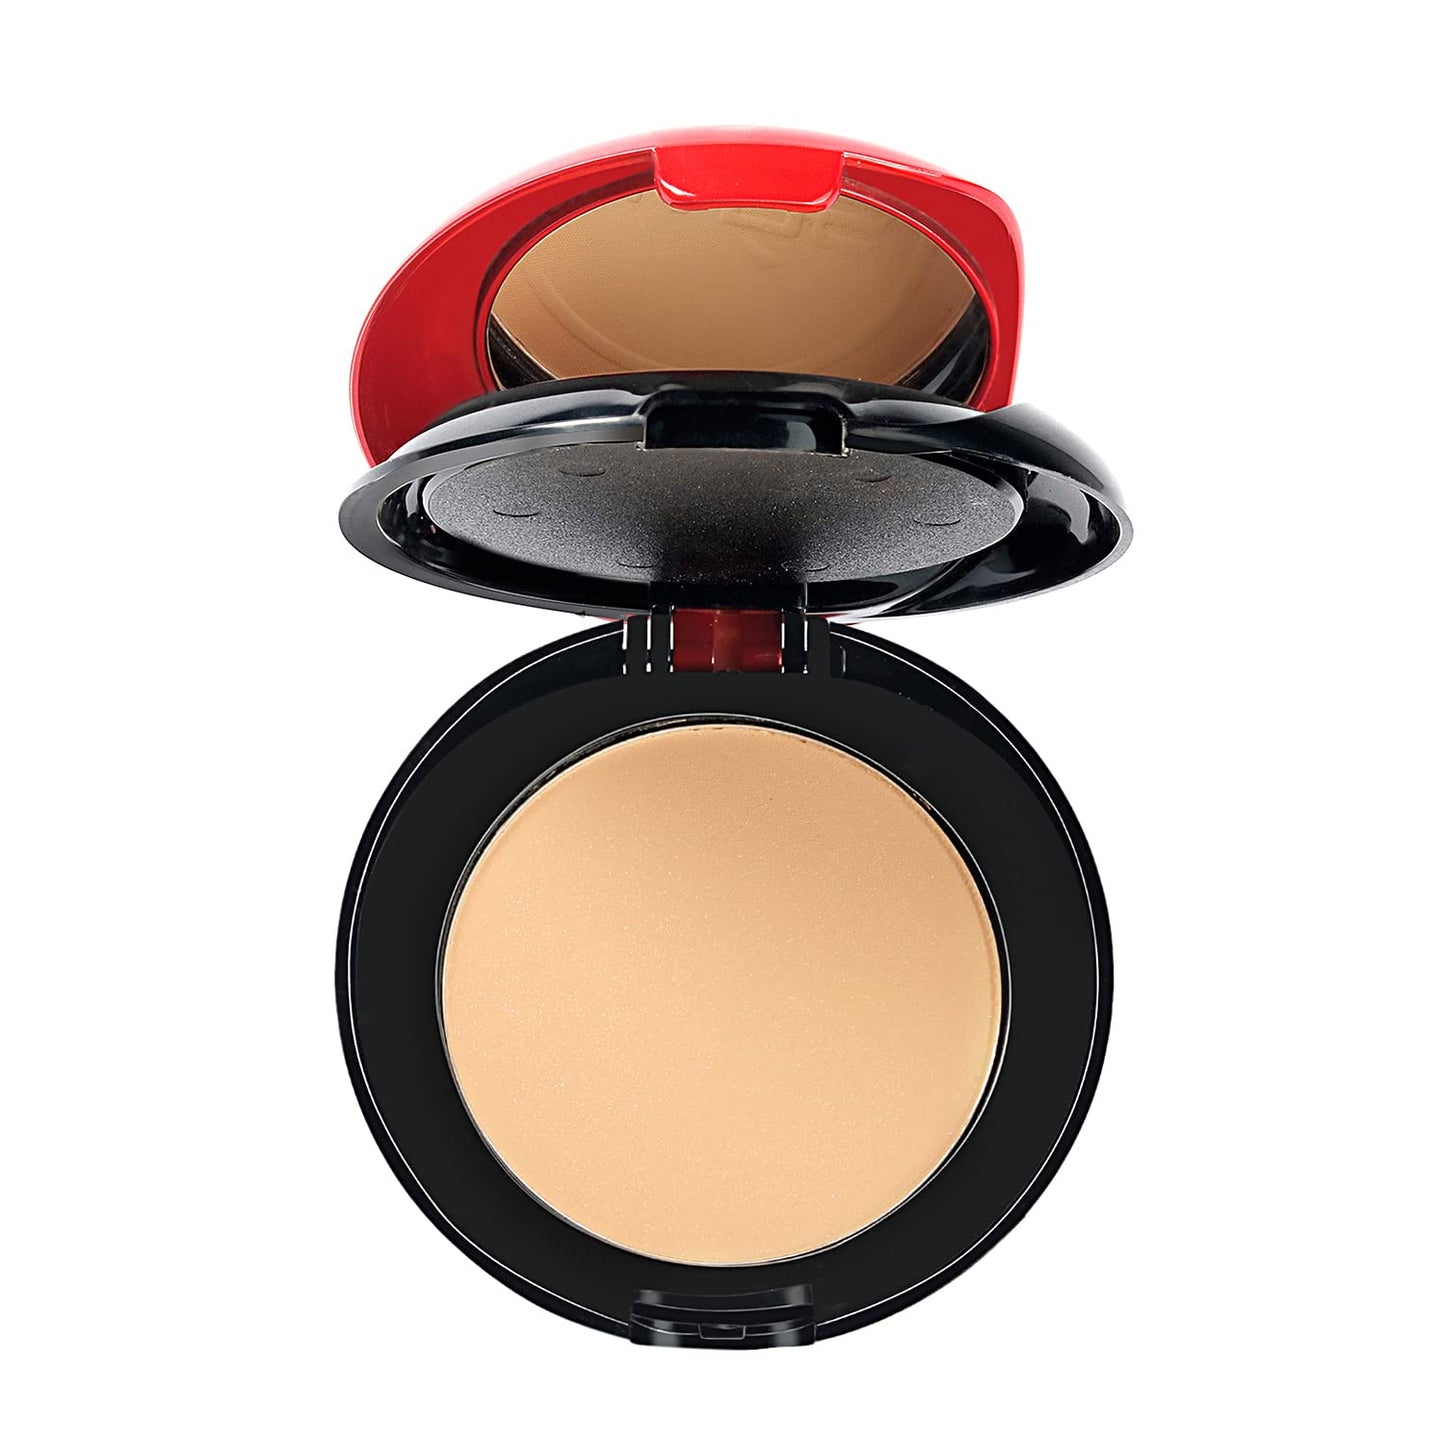 MARS Silky Skin Conceals Blemishes And Smoothes Compact Powder 20 g(Shade-03)